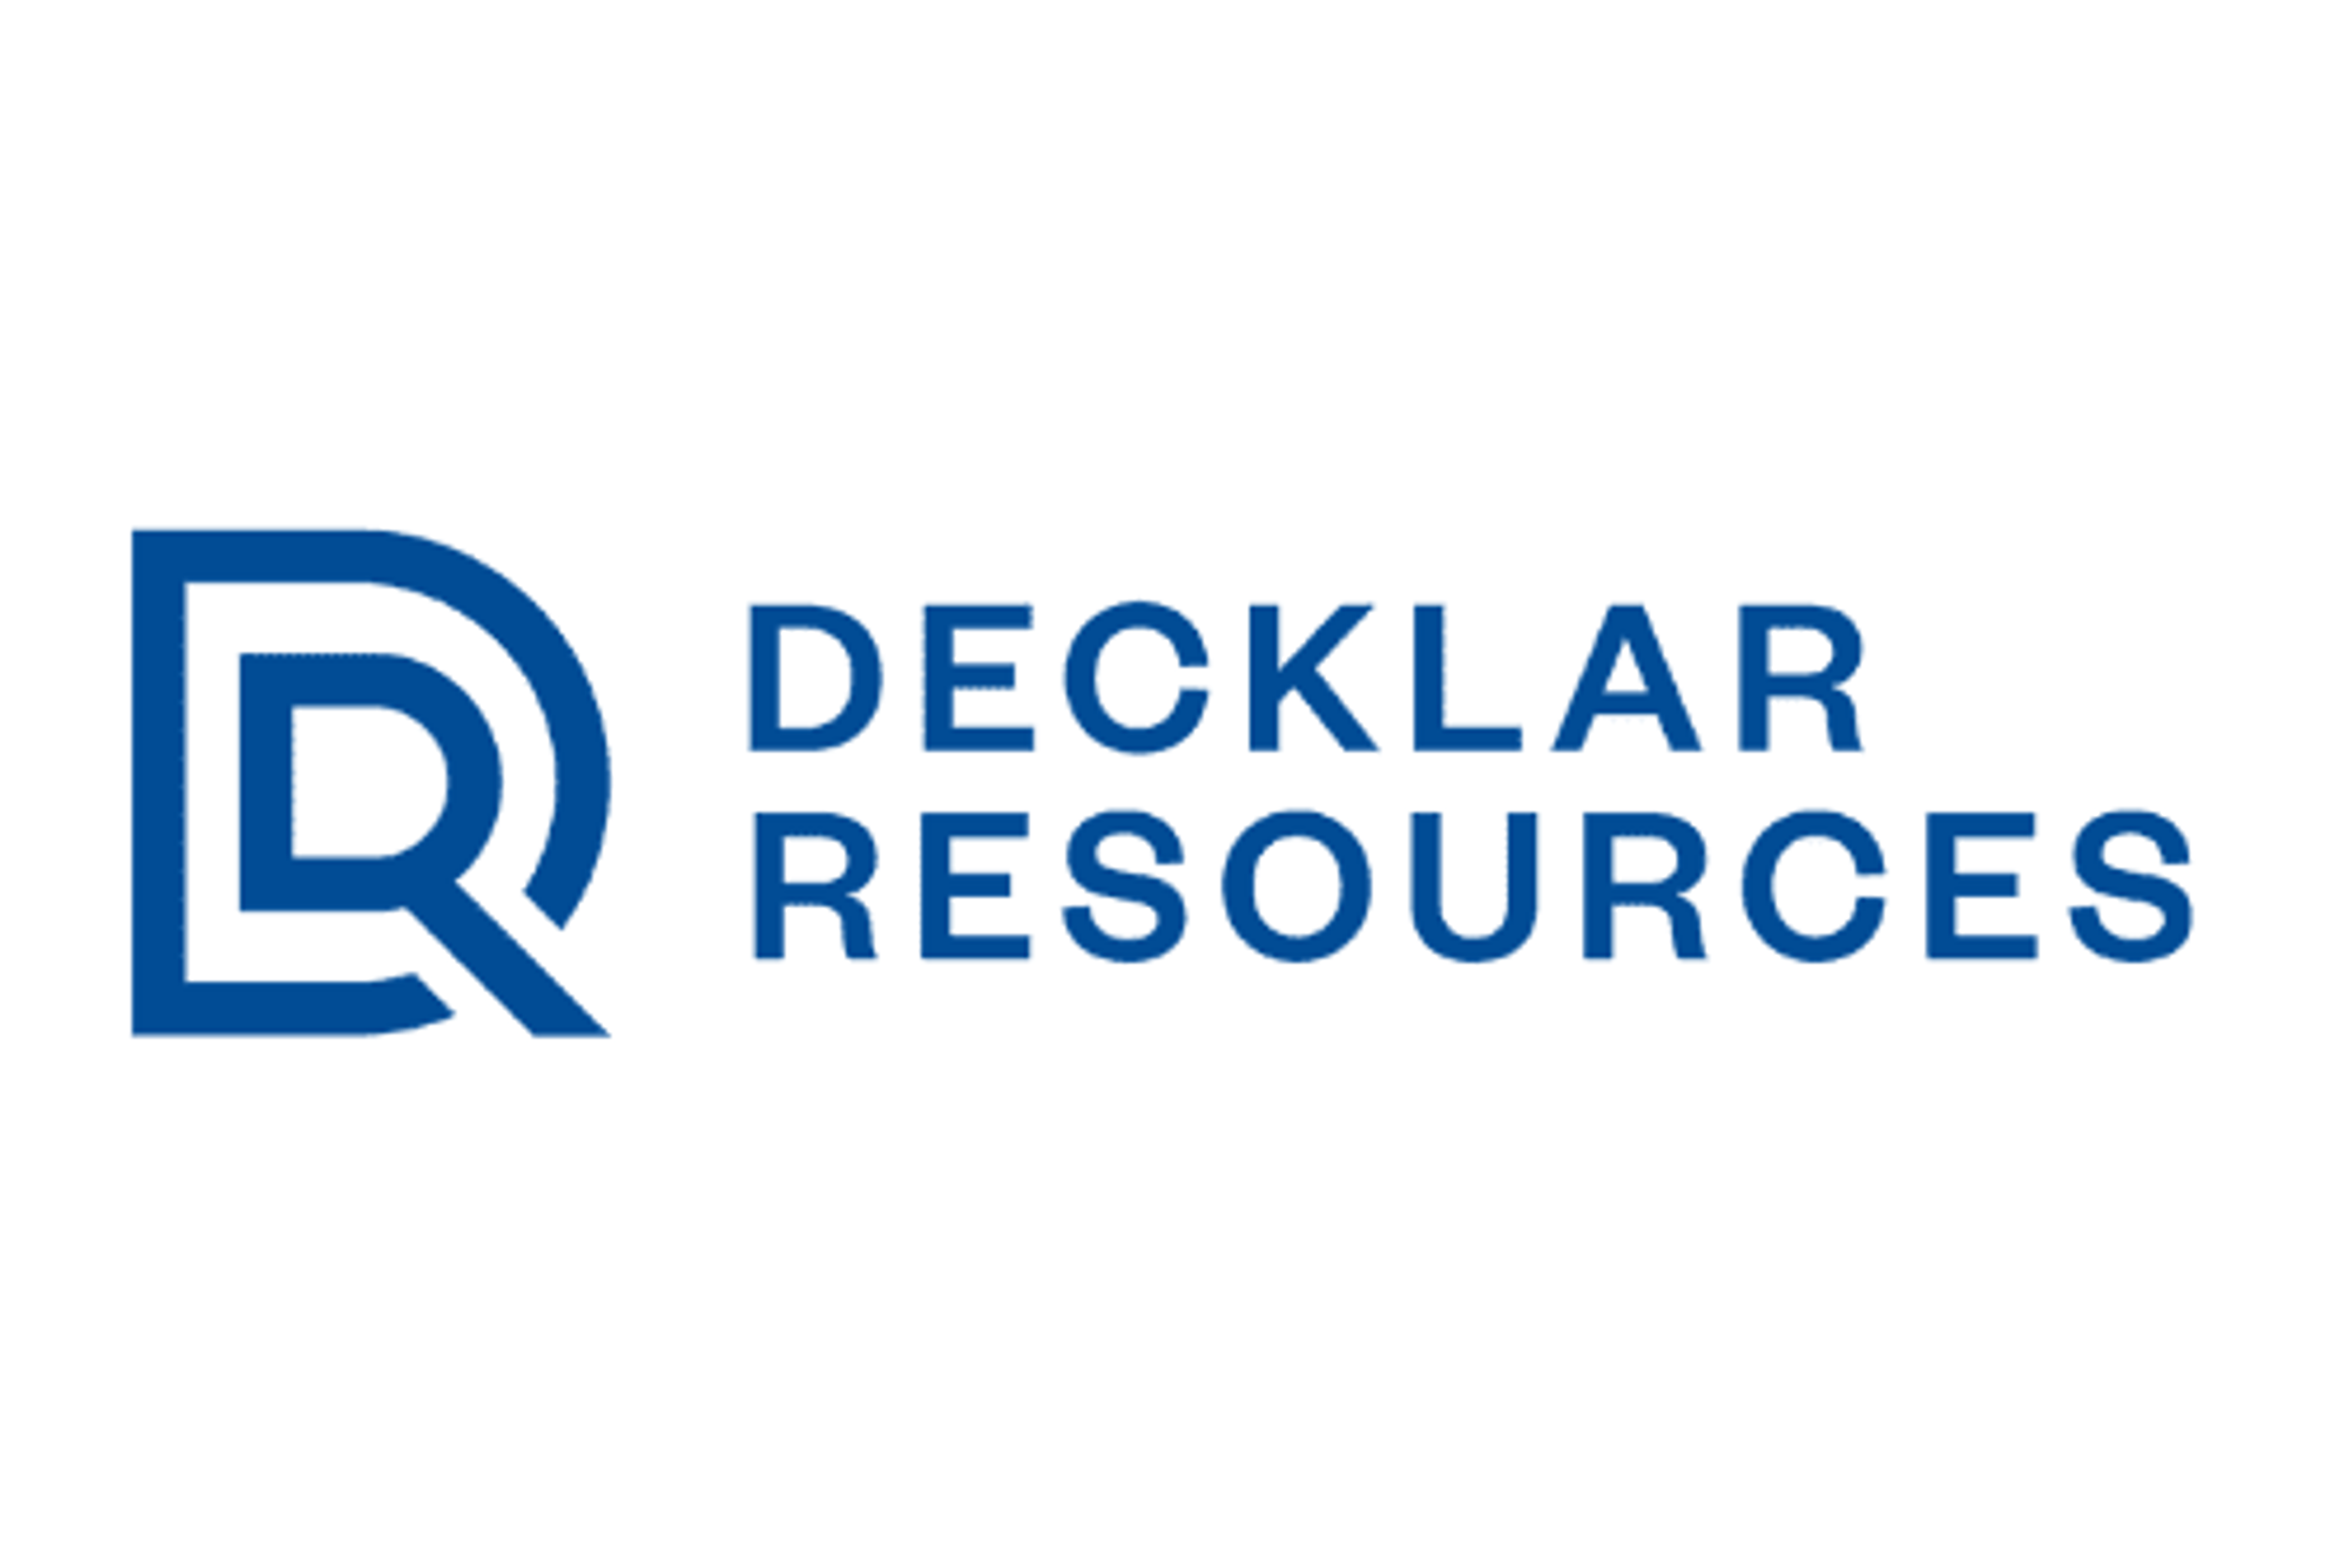 Decklar Resources Inc. Commences Shipment of Crude Oil to Market From Oza Oil Field in Nigeria